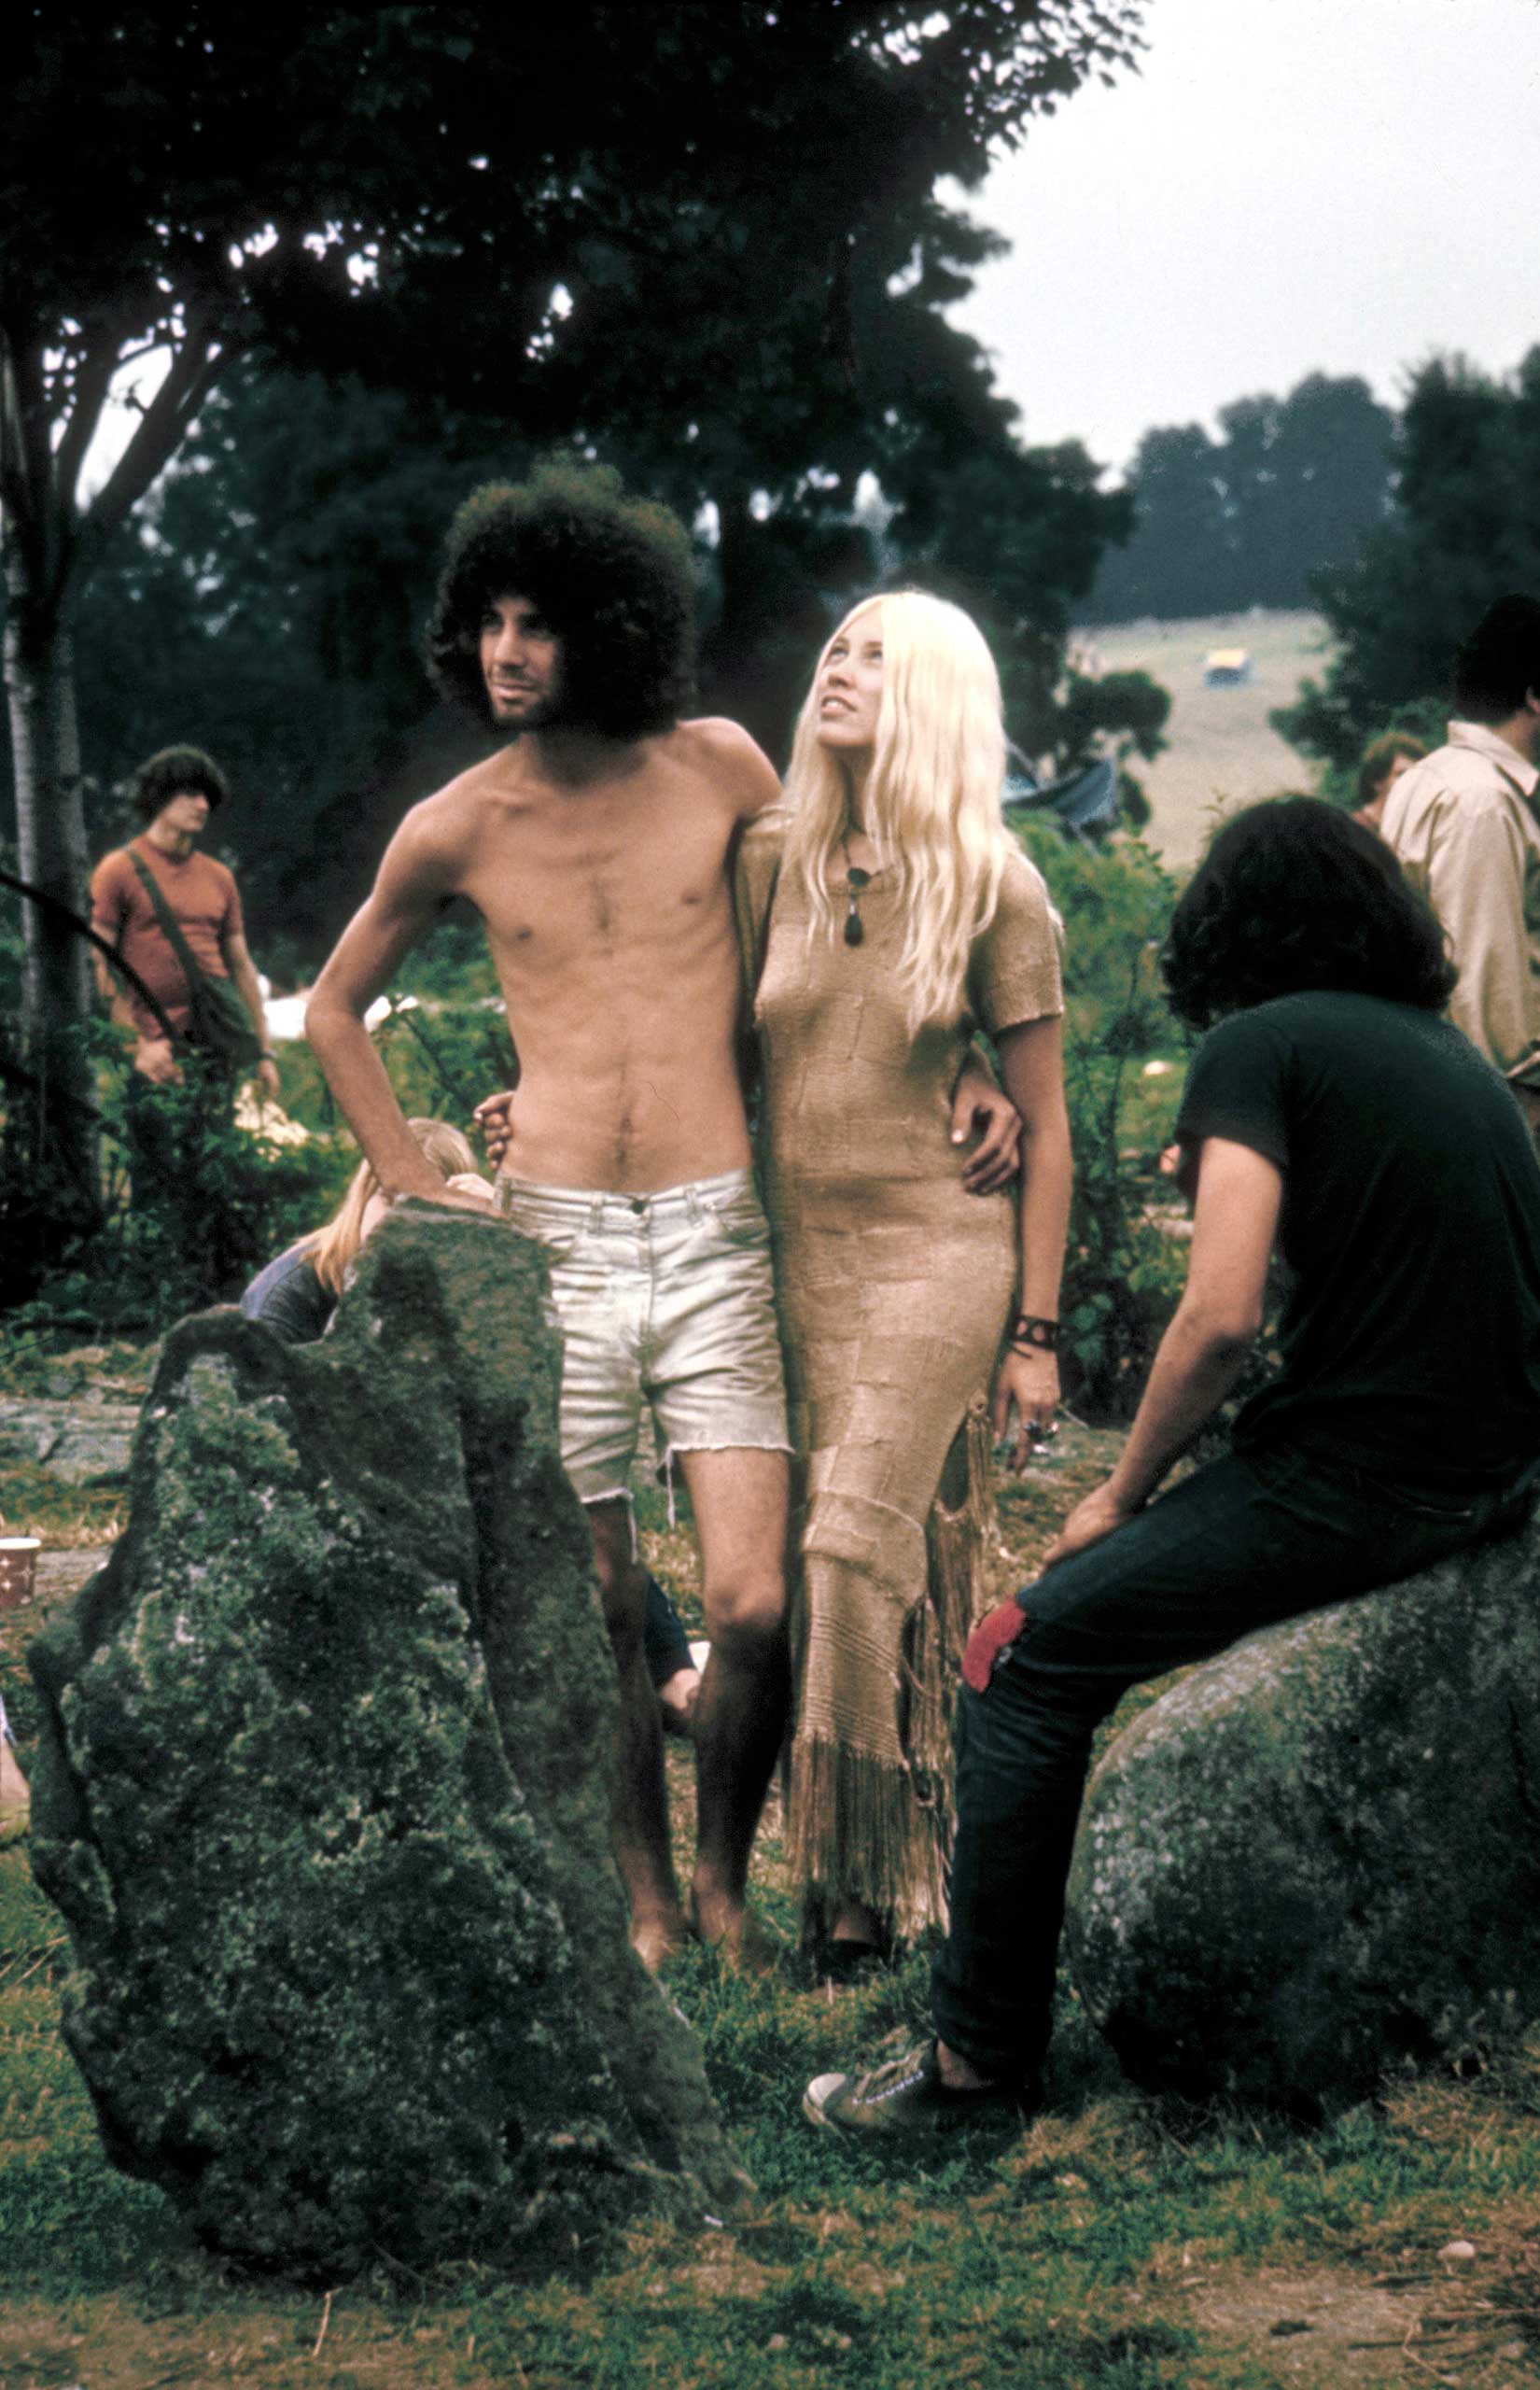 <b>Not published in LIFE.</b> Woodstock Music &amp; Art Fair, August 1969. "I like this shot of a handsome young hippie couple," photographer John Dominis told LIFE.com. "They seem so comfortable with each other. A very endearing image, I think." (John Dominis&mdash;Time &amp; Life Pictures/Getty Images)